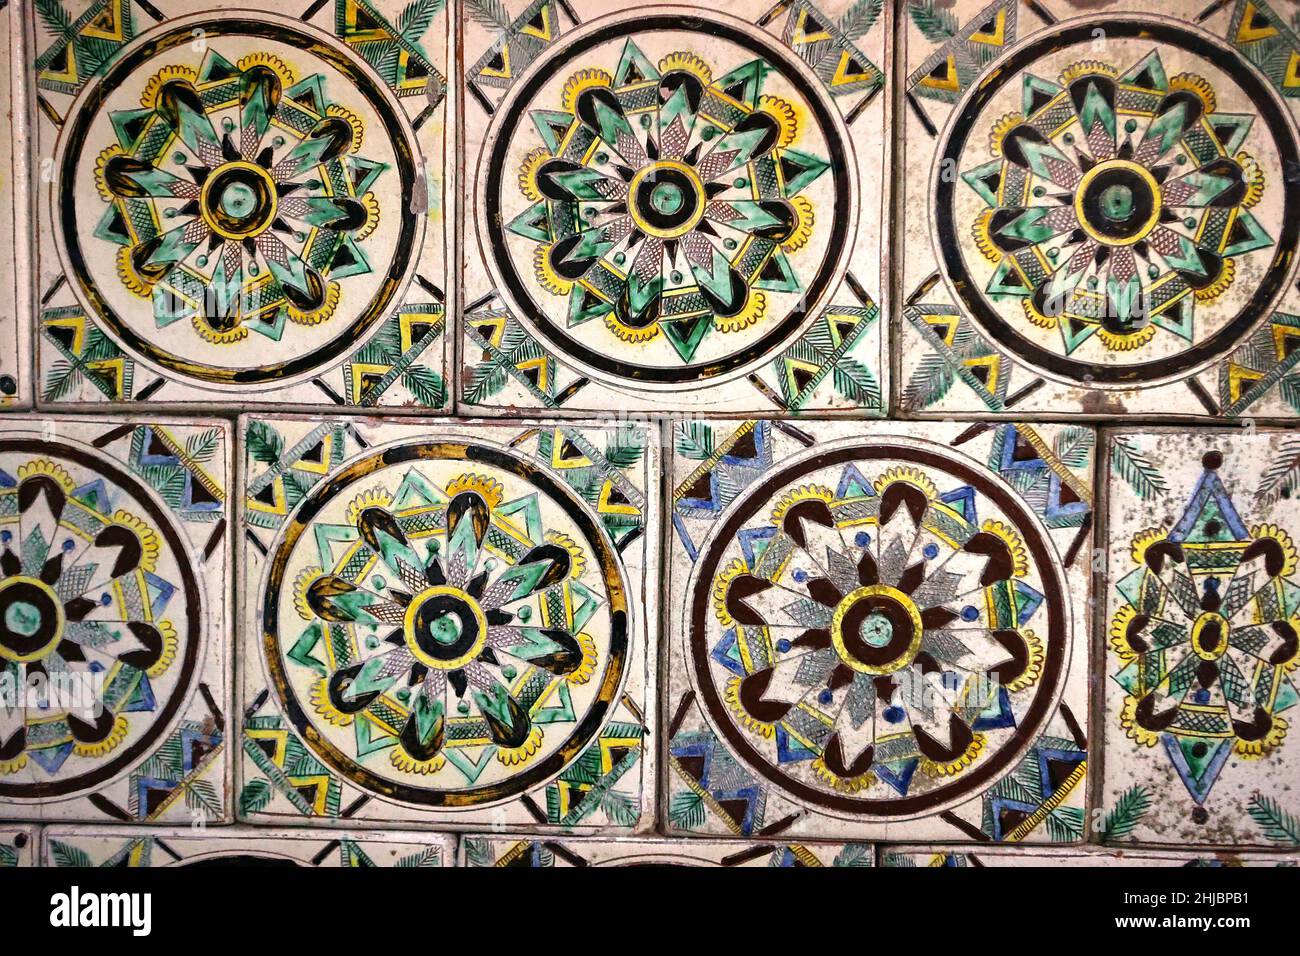 KOLOMYIA, UKRAINE - JUNE 22, 2022 - Tiles are part of the collection of Kosiv painted ceramics on display at the Yosaphat Kobrynsky National Museum of Stock Photo